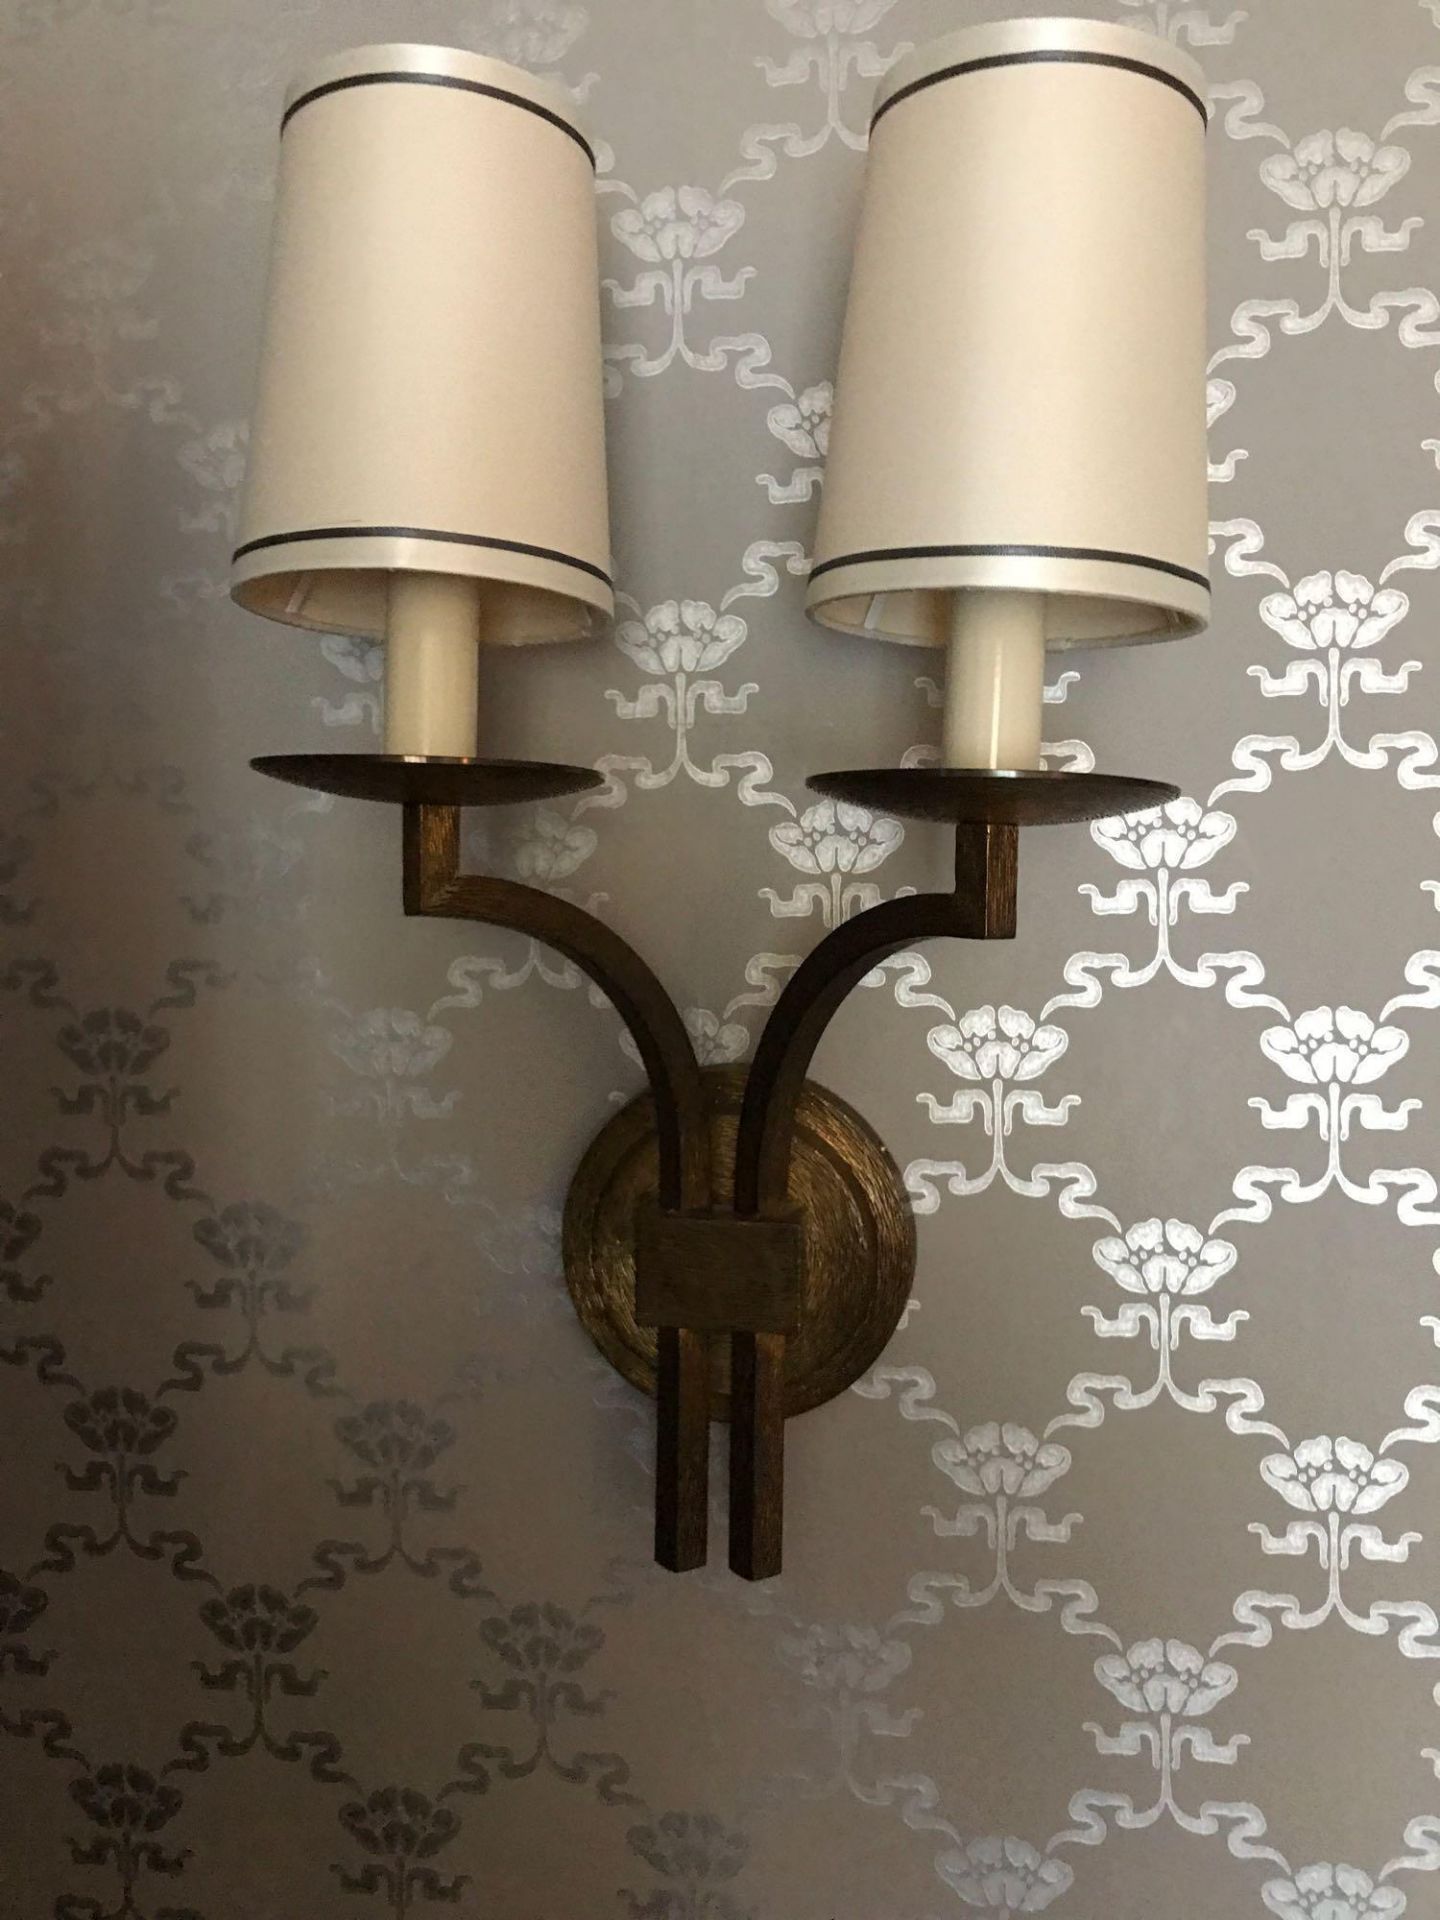 A Pair Of Dernier And Hamlyn Twin Arm Antique Bronzed Wall Sconces With Shade 51cm Room 610